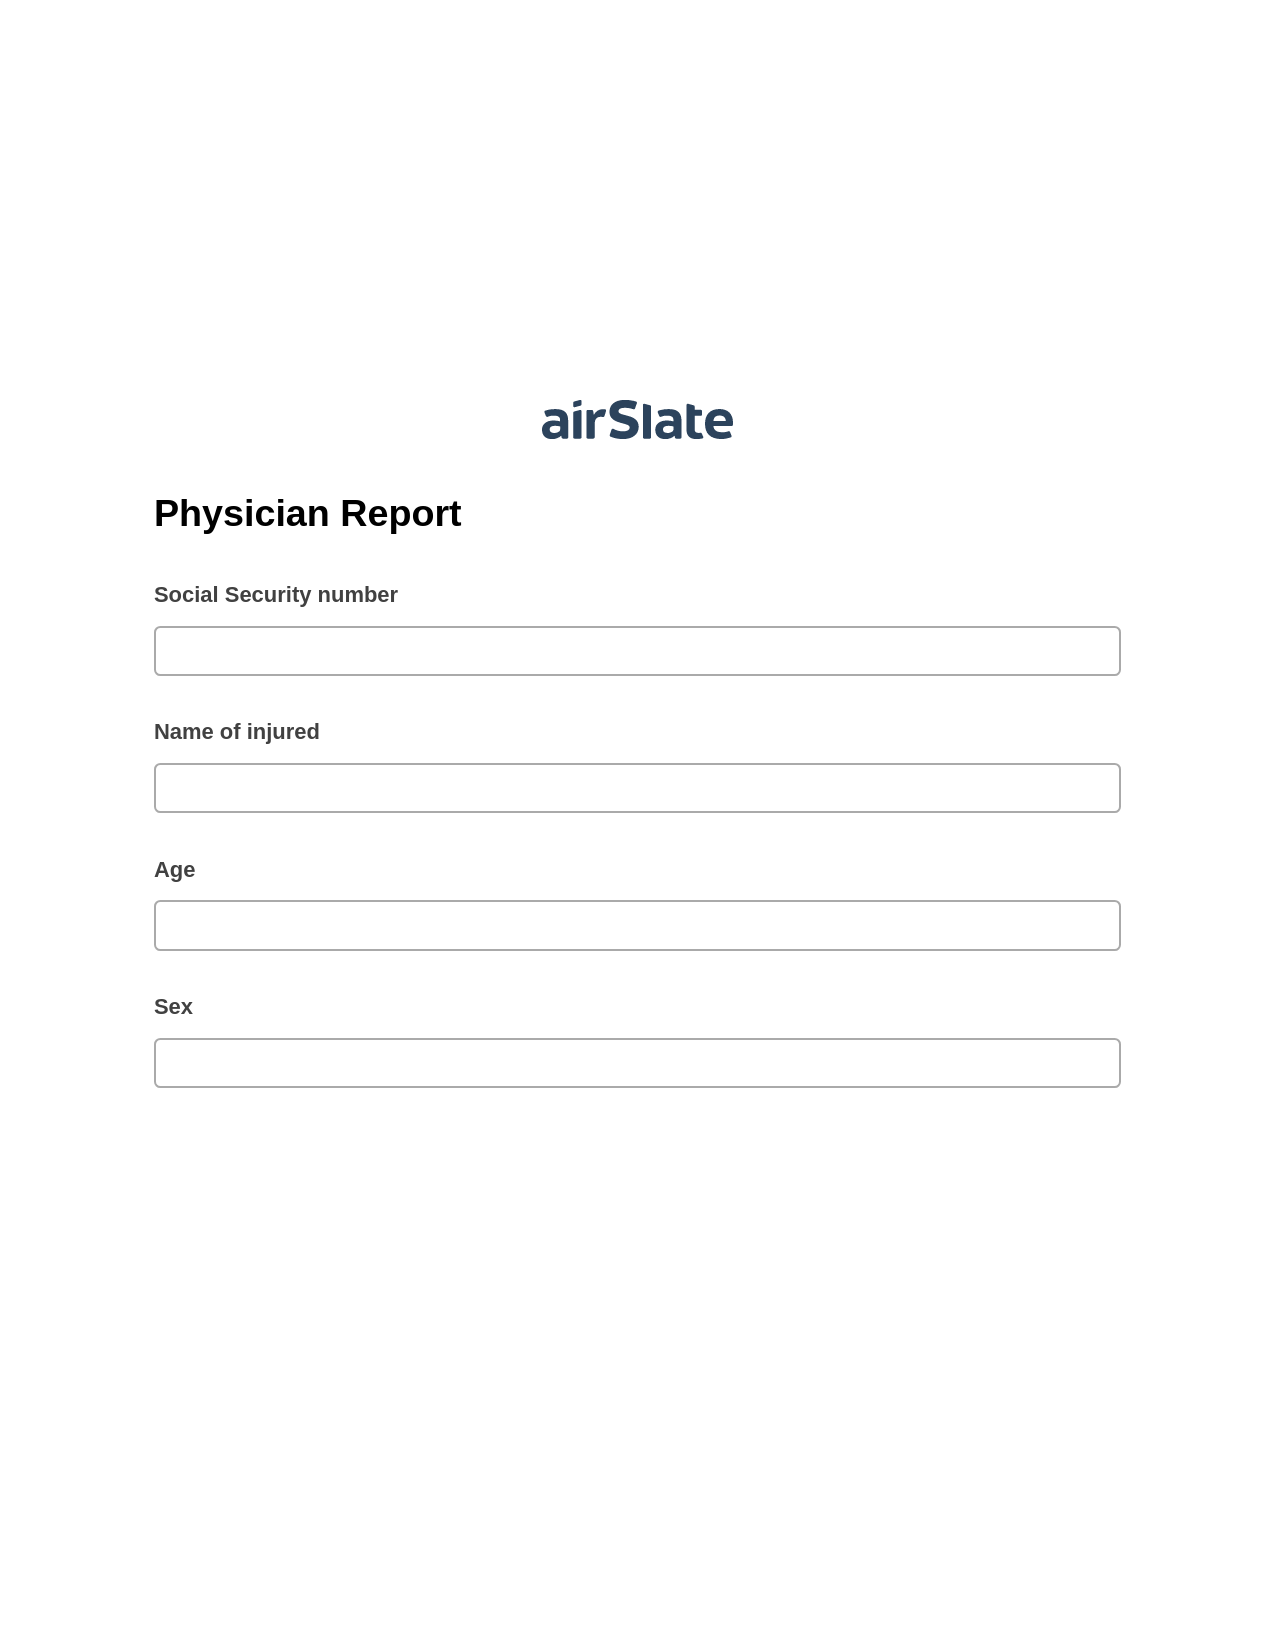 Physician Report Pre-fill from Excel Spreadsheet Bot, Unassign Role Bot, Slack Two-Way Binding Bot